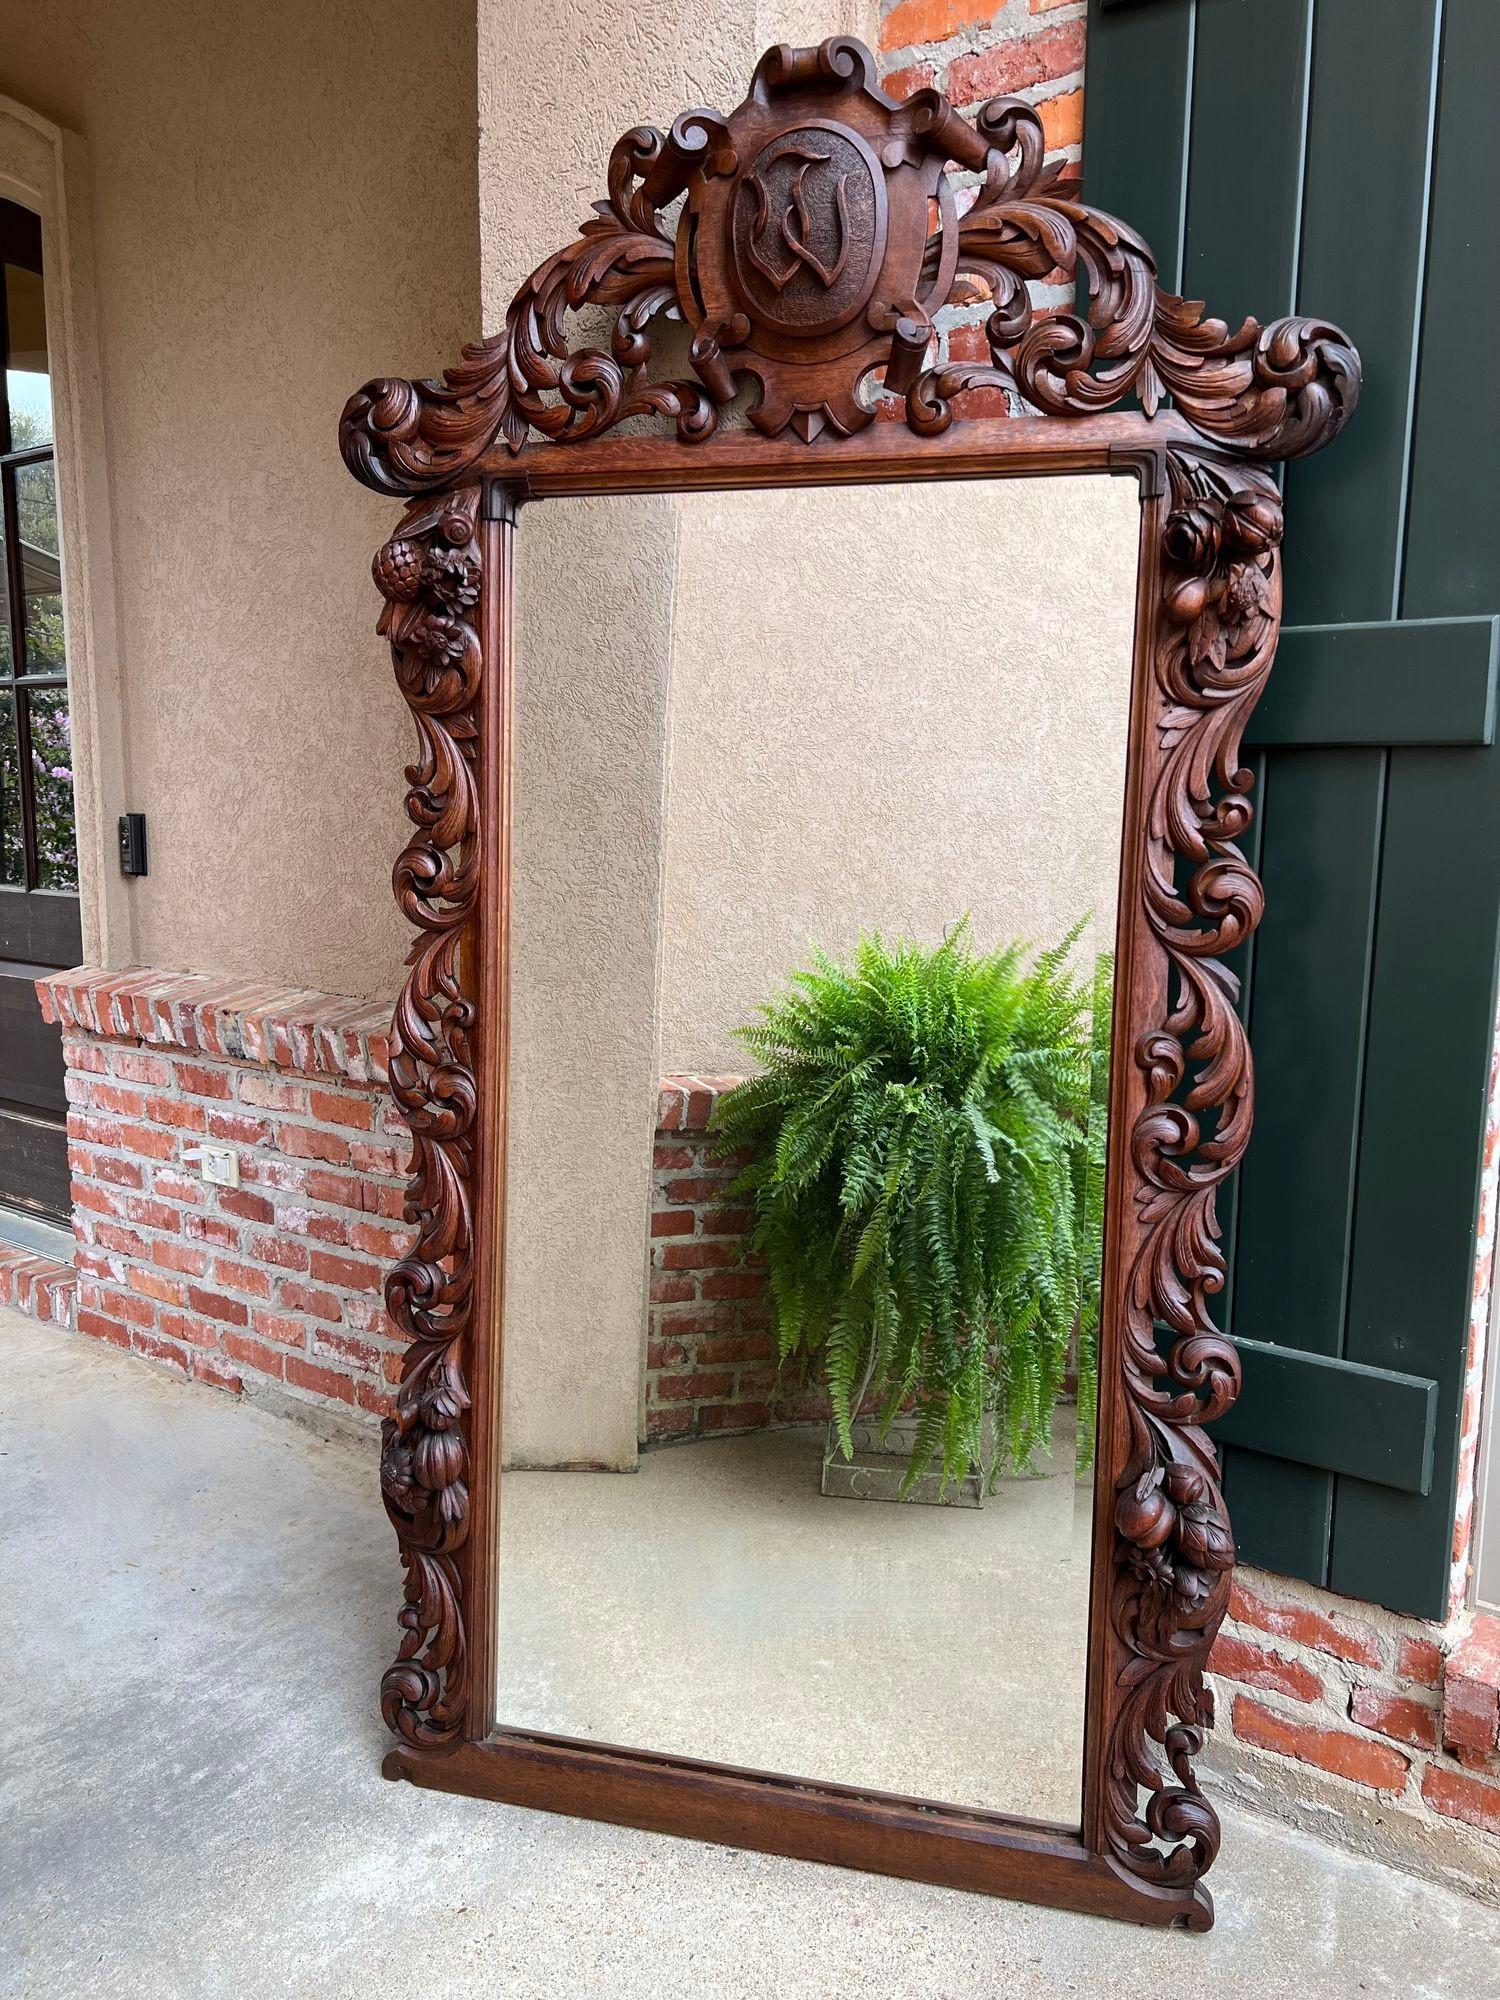 Antique French Pier Mantel wall mirror baroque carved oak Renaissance, circa 1880.

Direct from France, a substantial 19th century carved French pier/mantel mirror, over 6.5 ft. tall! Stunning hand carved details, probably commissioned for an